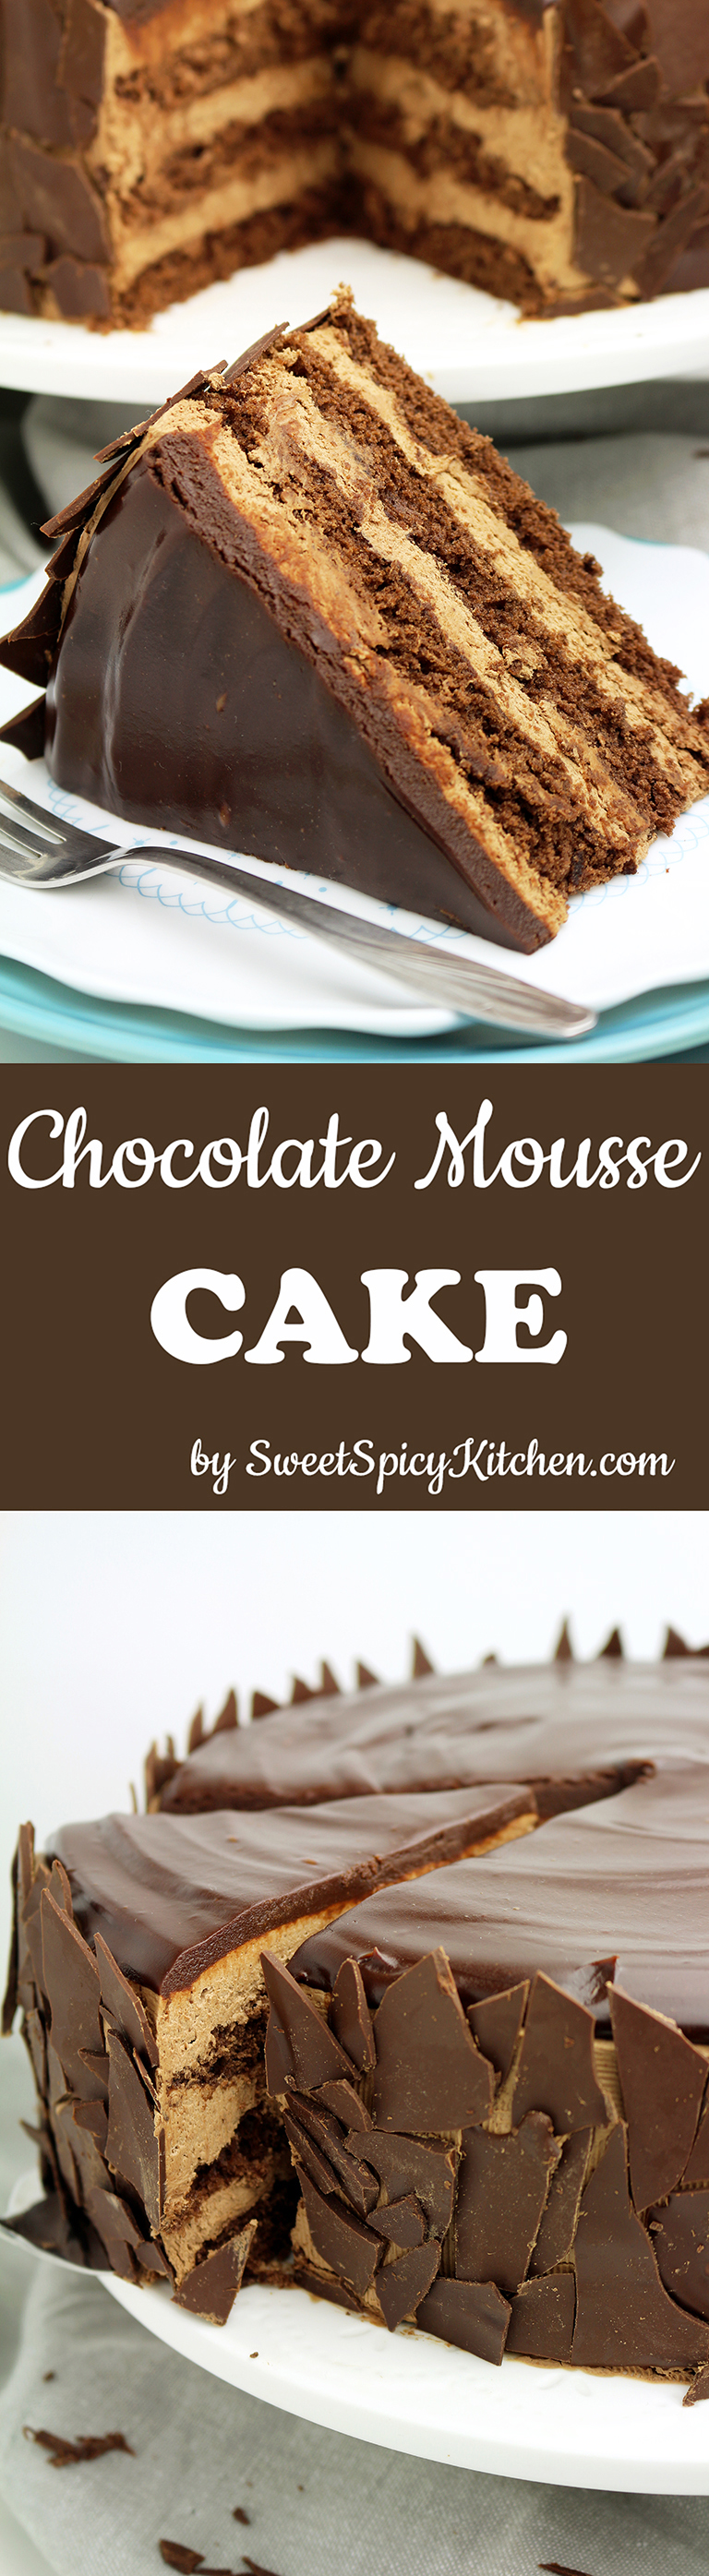 Chocolate Mousse Cake melts in your mouth; a rich chocolate mousse filling with a layer of chocolate ganache on the top